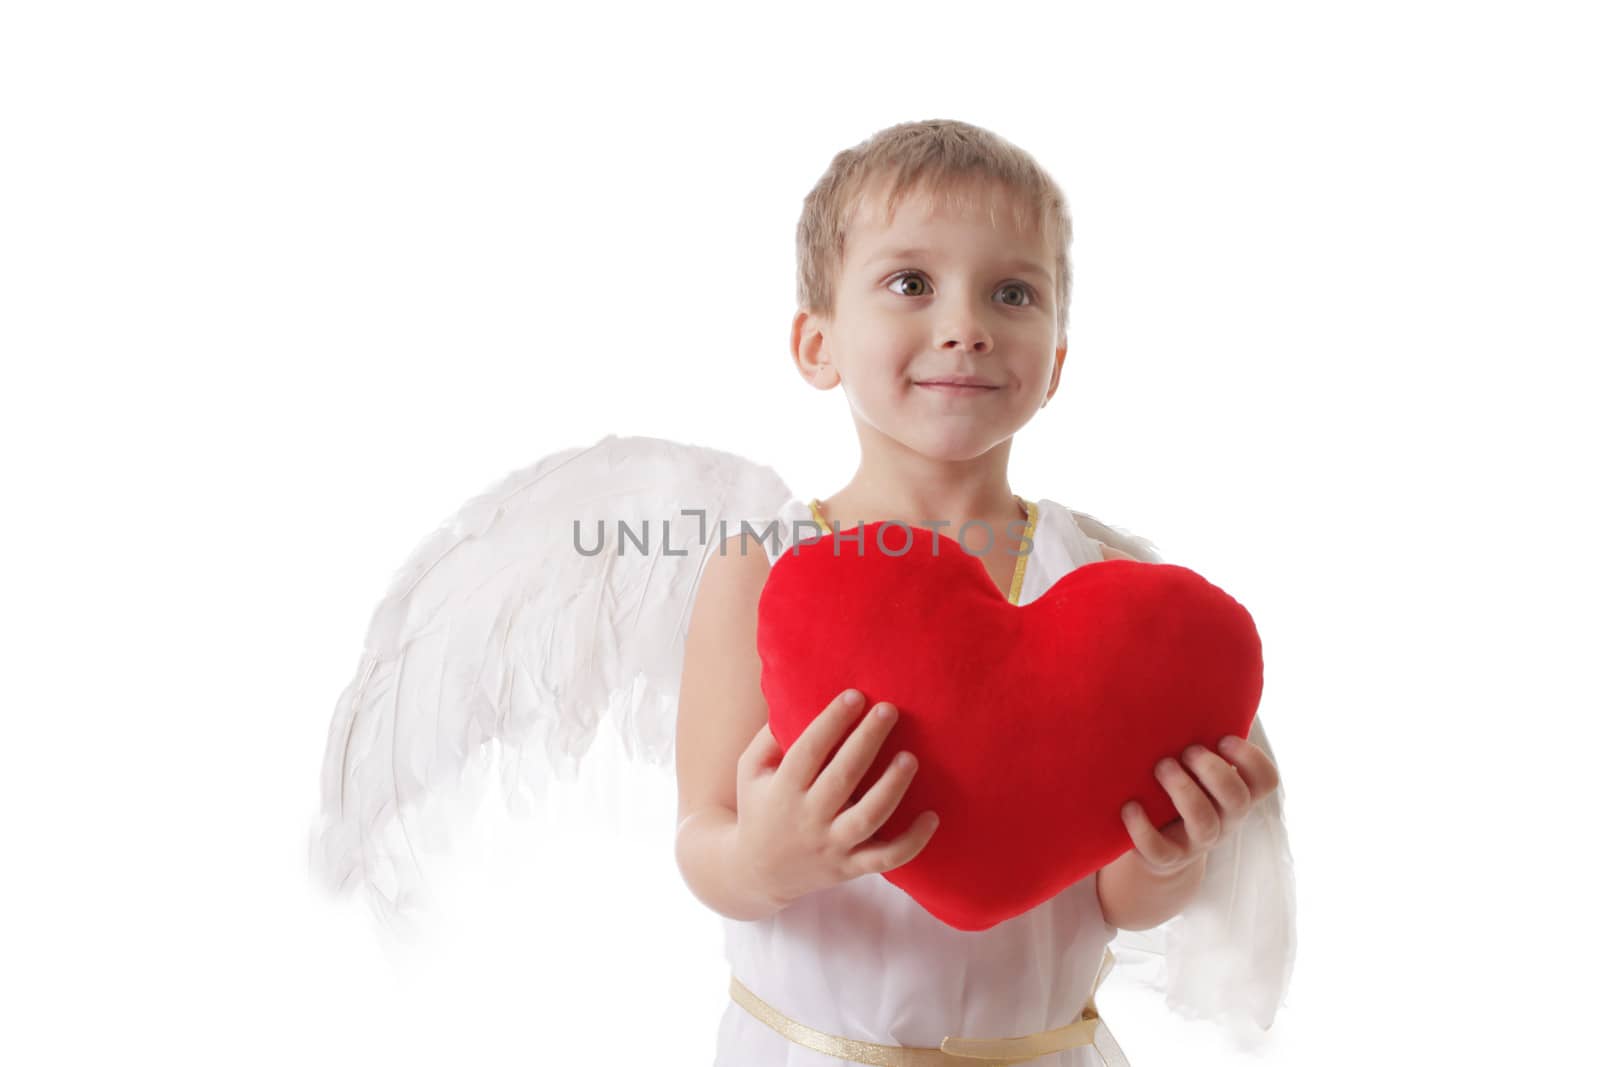 Cute smiling cupid with heart in a hands, isolated on white